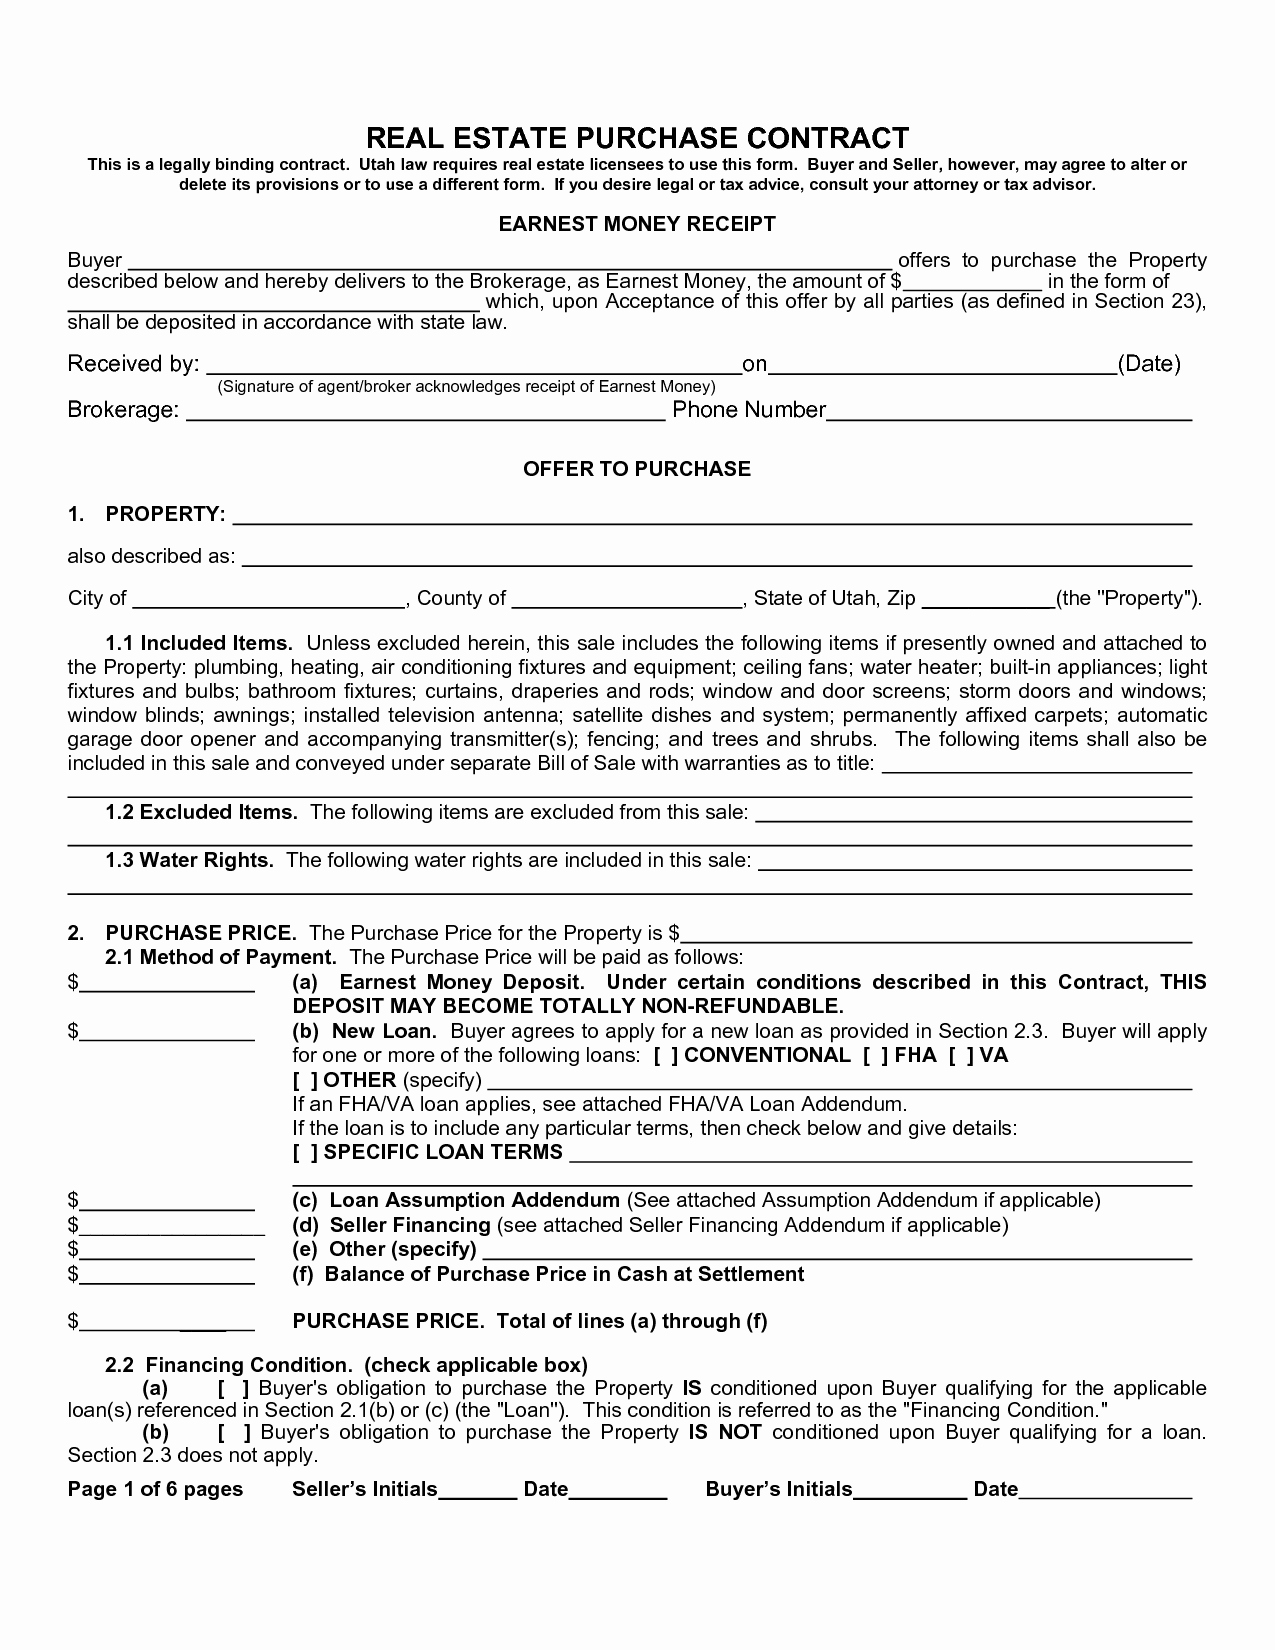 Purchase and Sale Agreement form Inspirational Real Estate Purchase Agreement form Sample Image Gallery